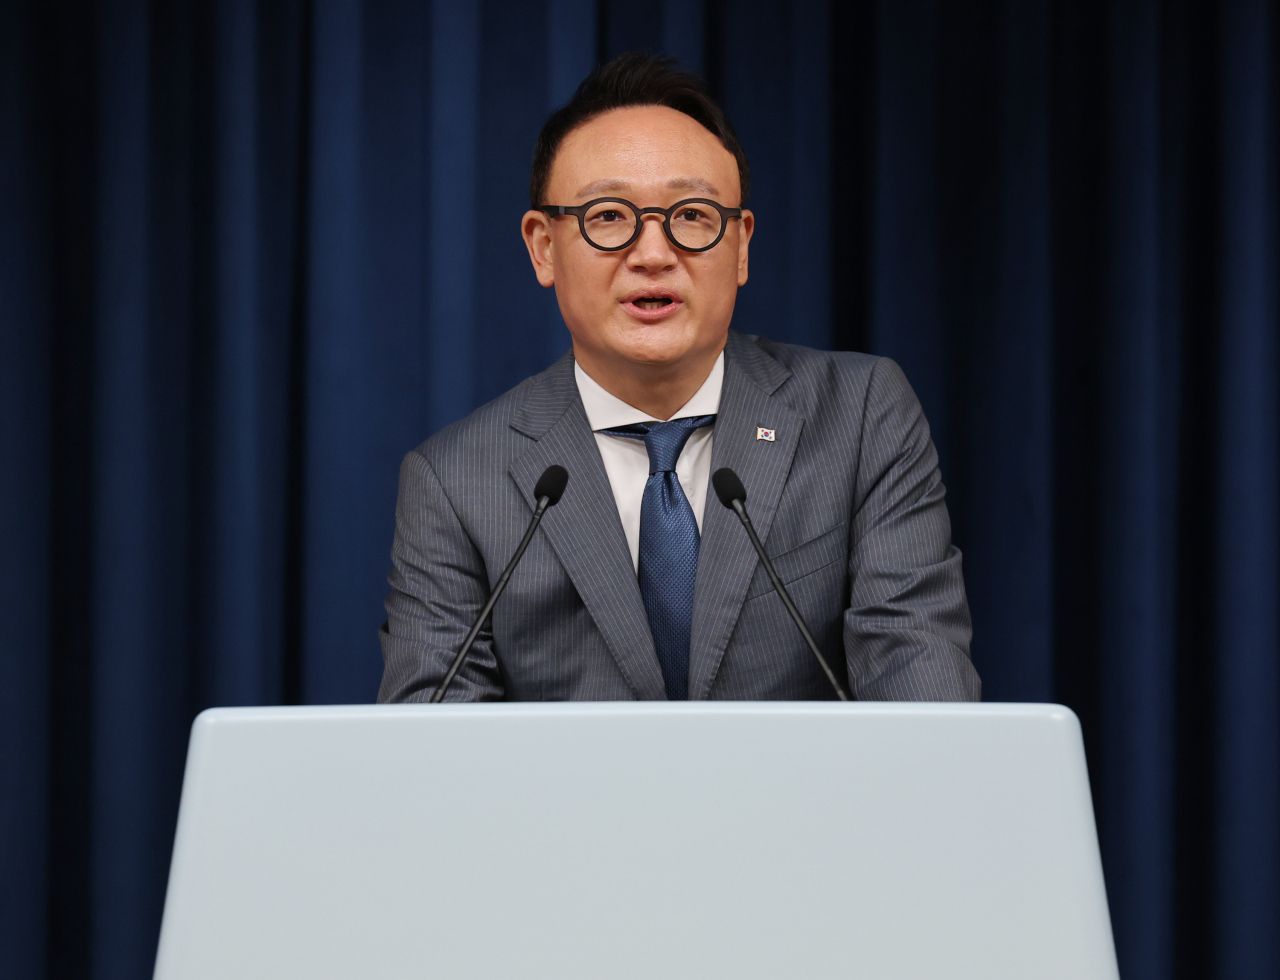 Ahn Sang-hoon, the senior presidential secretary for social affairs, speaks during a press conference at the presidential office in Seoul on Tuesday, about the government's proposal to lower the elementary school starting age to 5. (Yonhap)